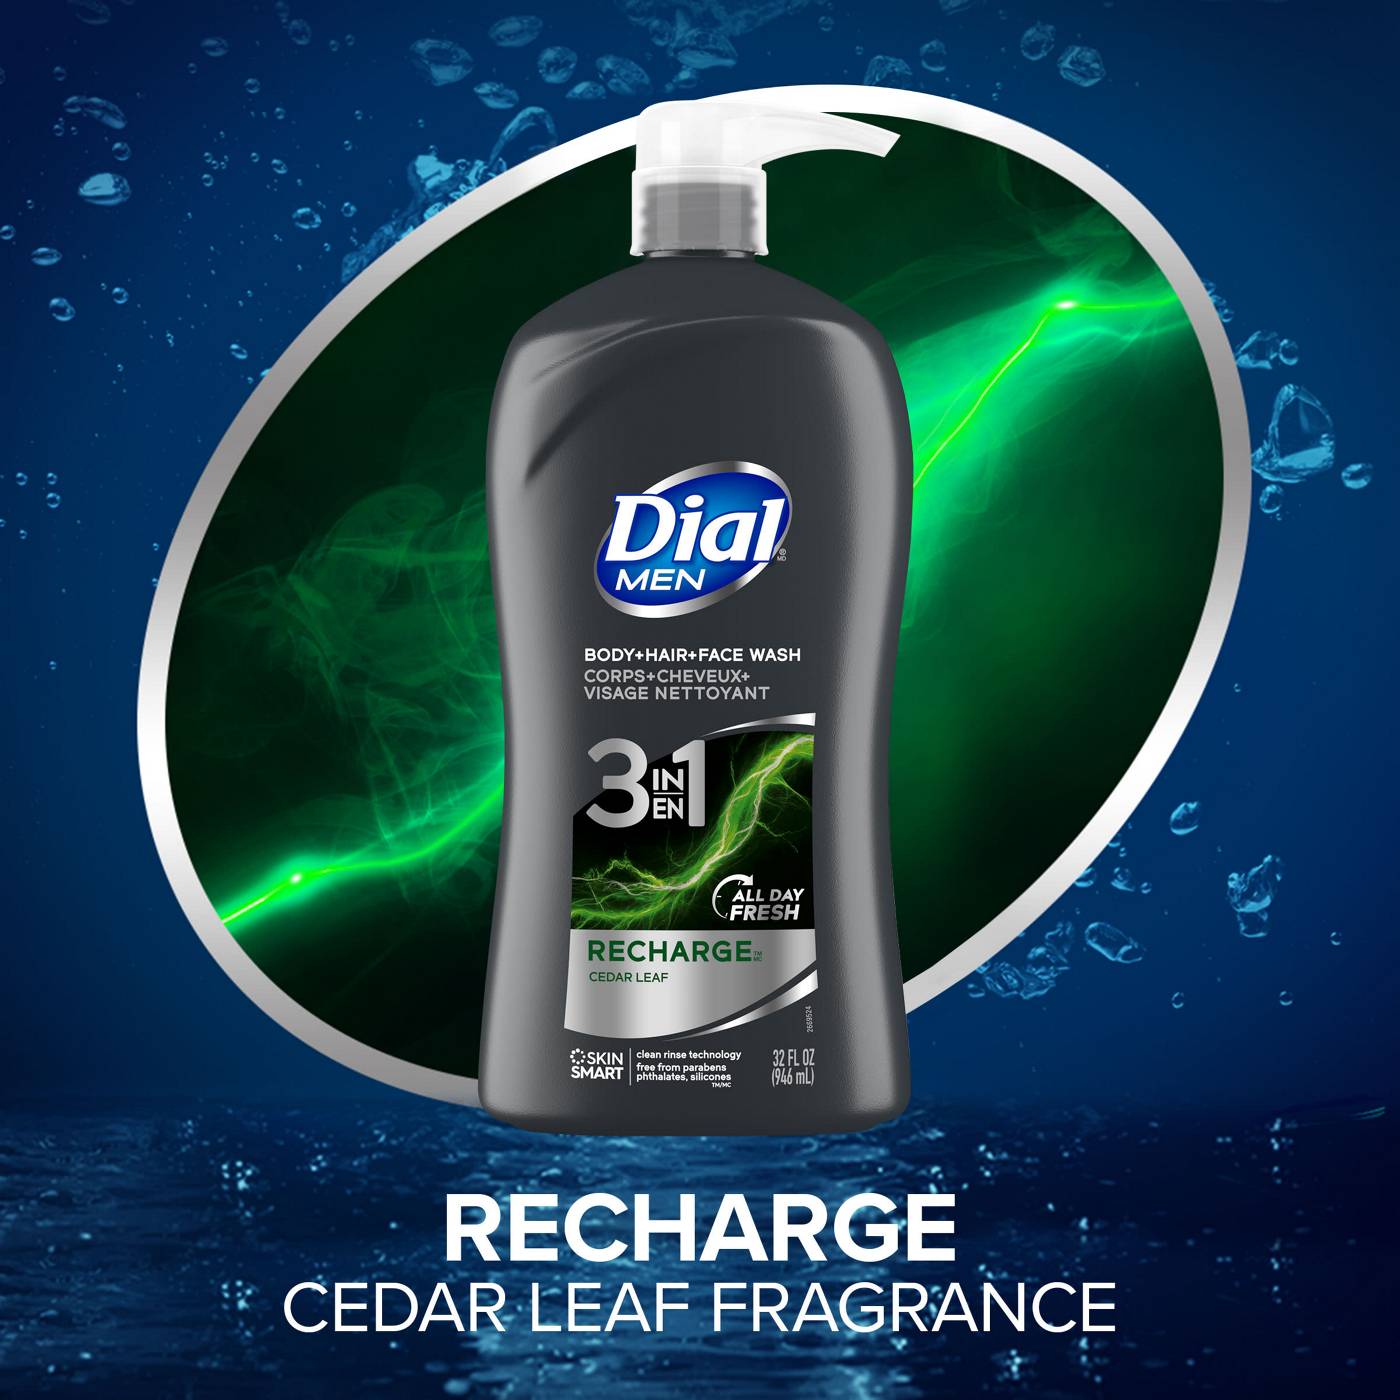 Dial Men 3in1 Body, Hair and Face Wash - Recharge; image 6 of 6